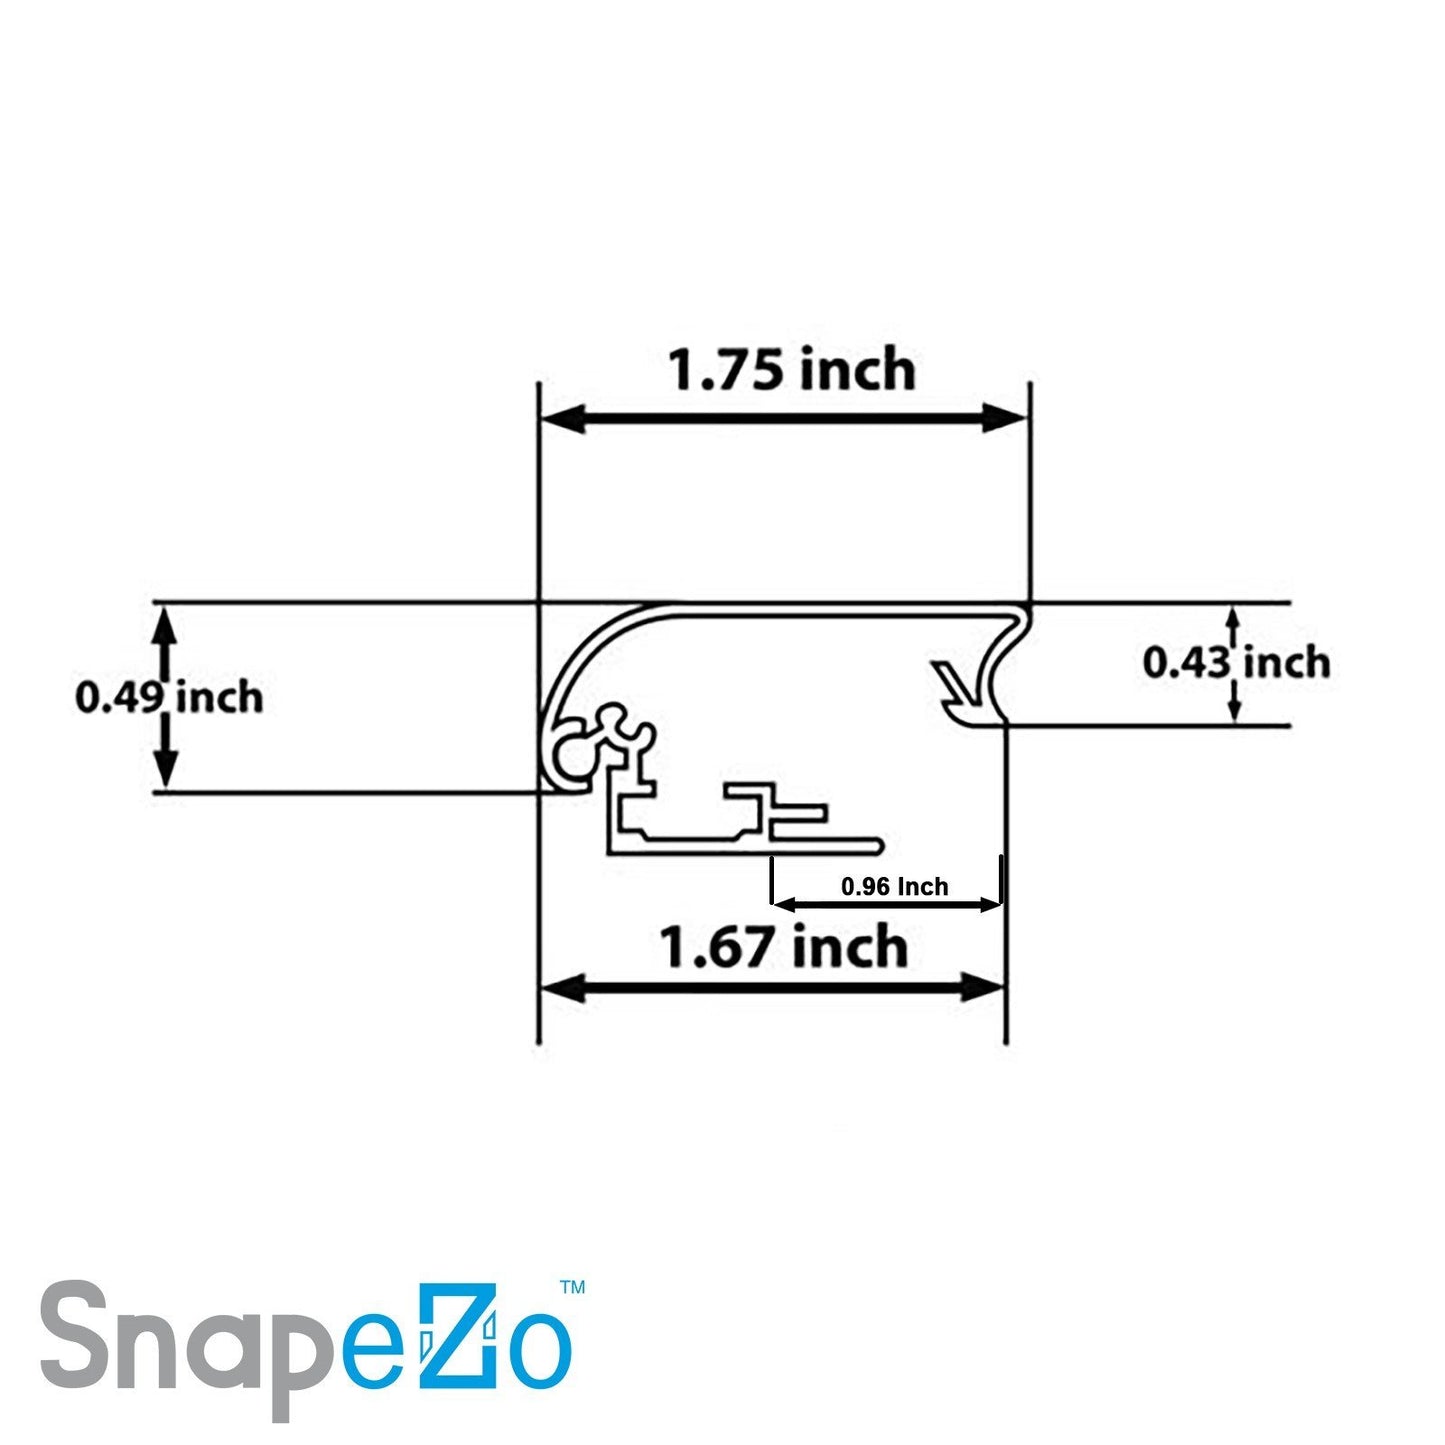 Load image into Gallery viewer, 36x50 Silver SnapeZo® Snap Frame - 1.7&amp;quot; Profile
